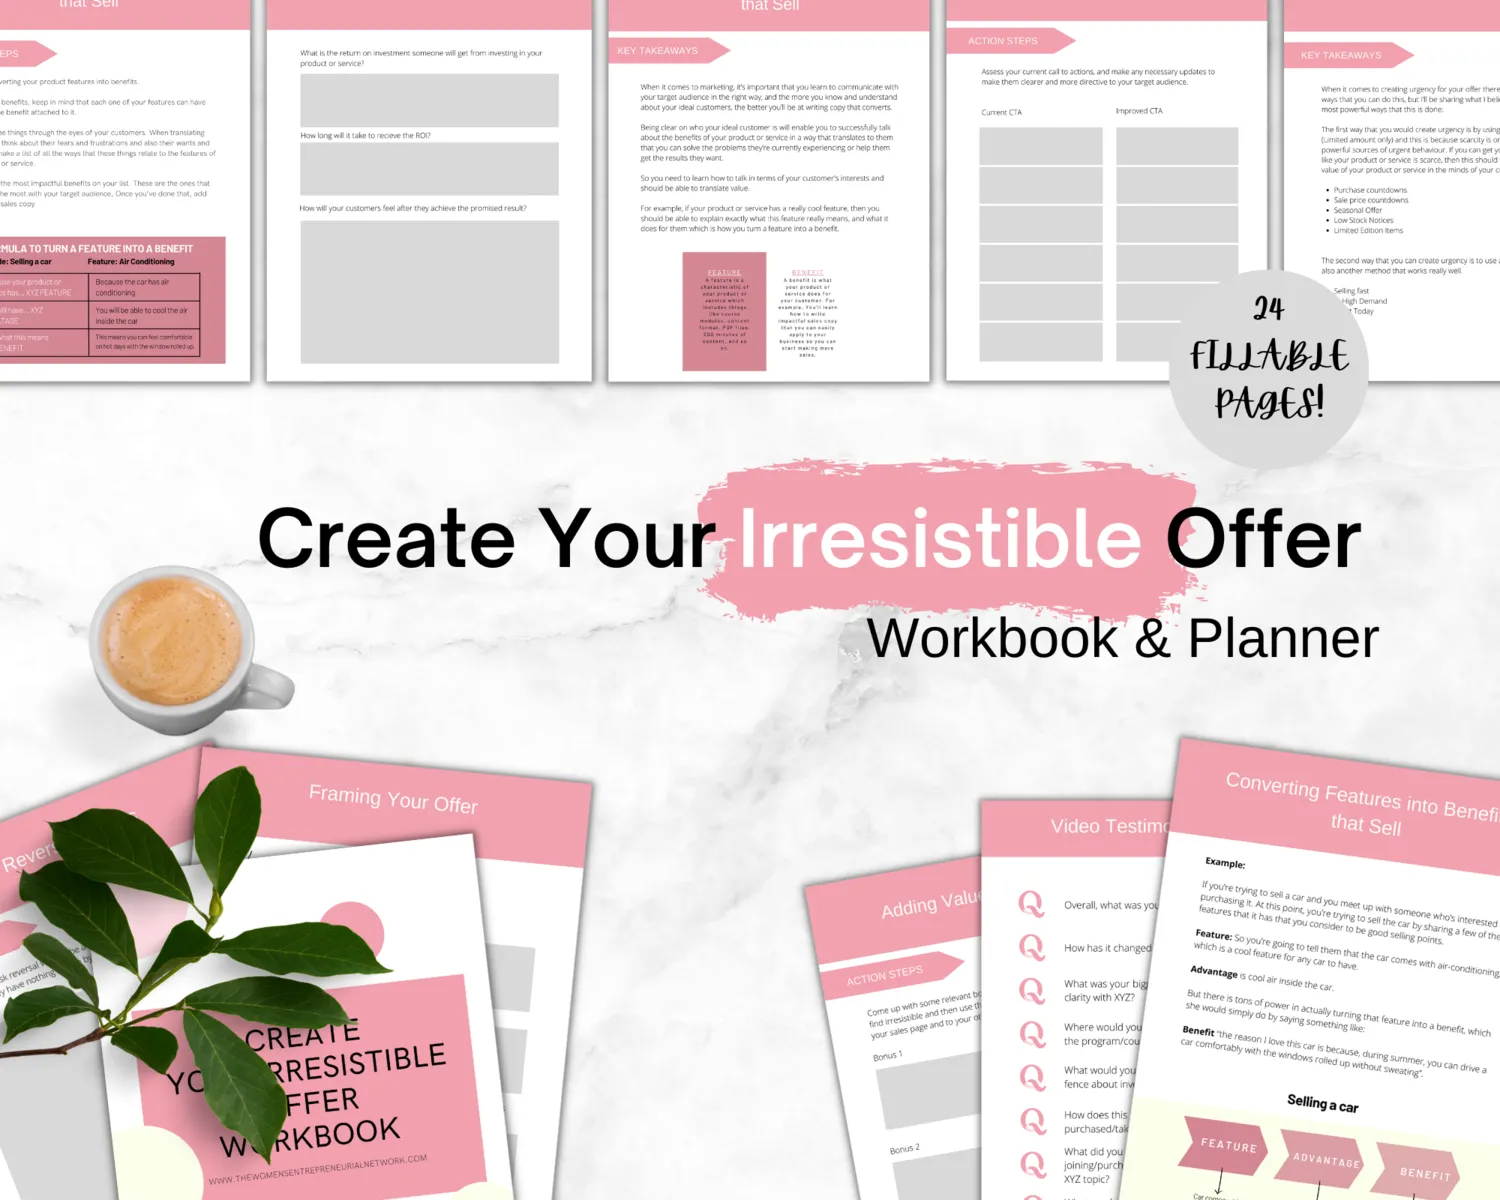 Irresistible Offer Workbook, Planner, and Guide for High-Converting Sales